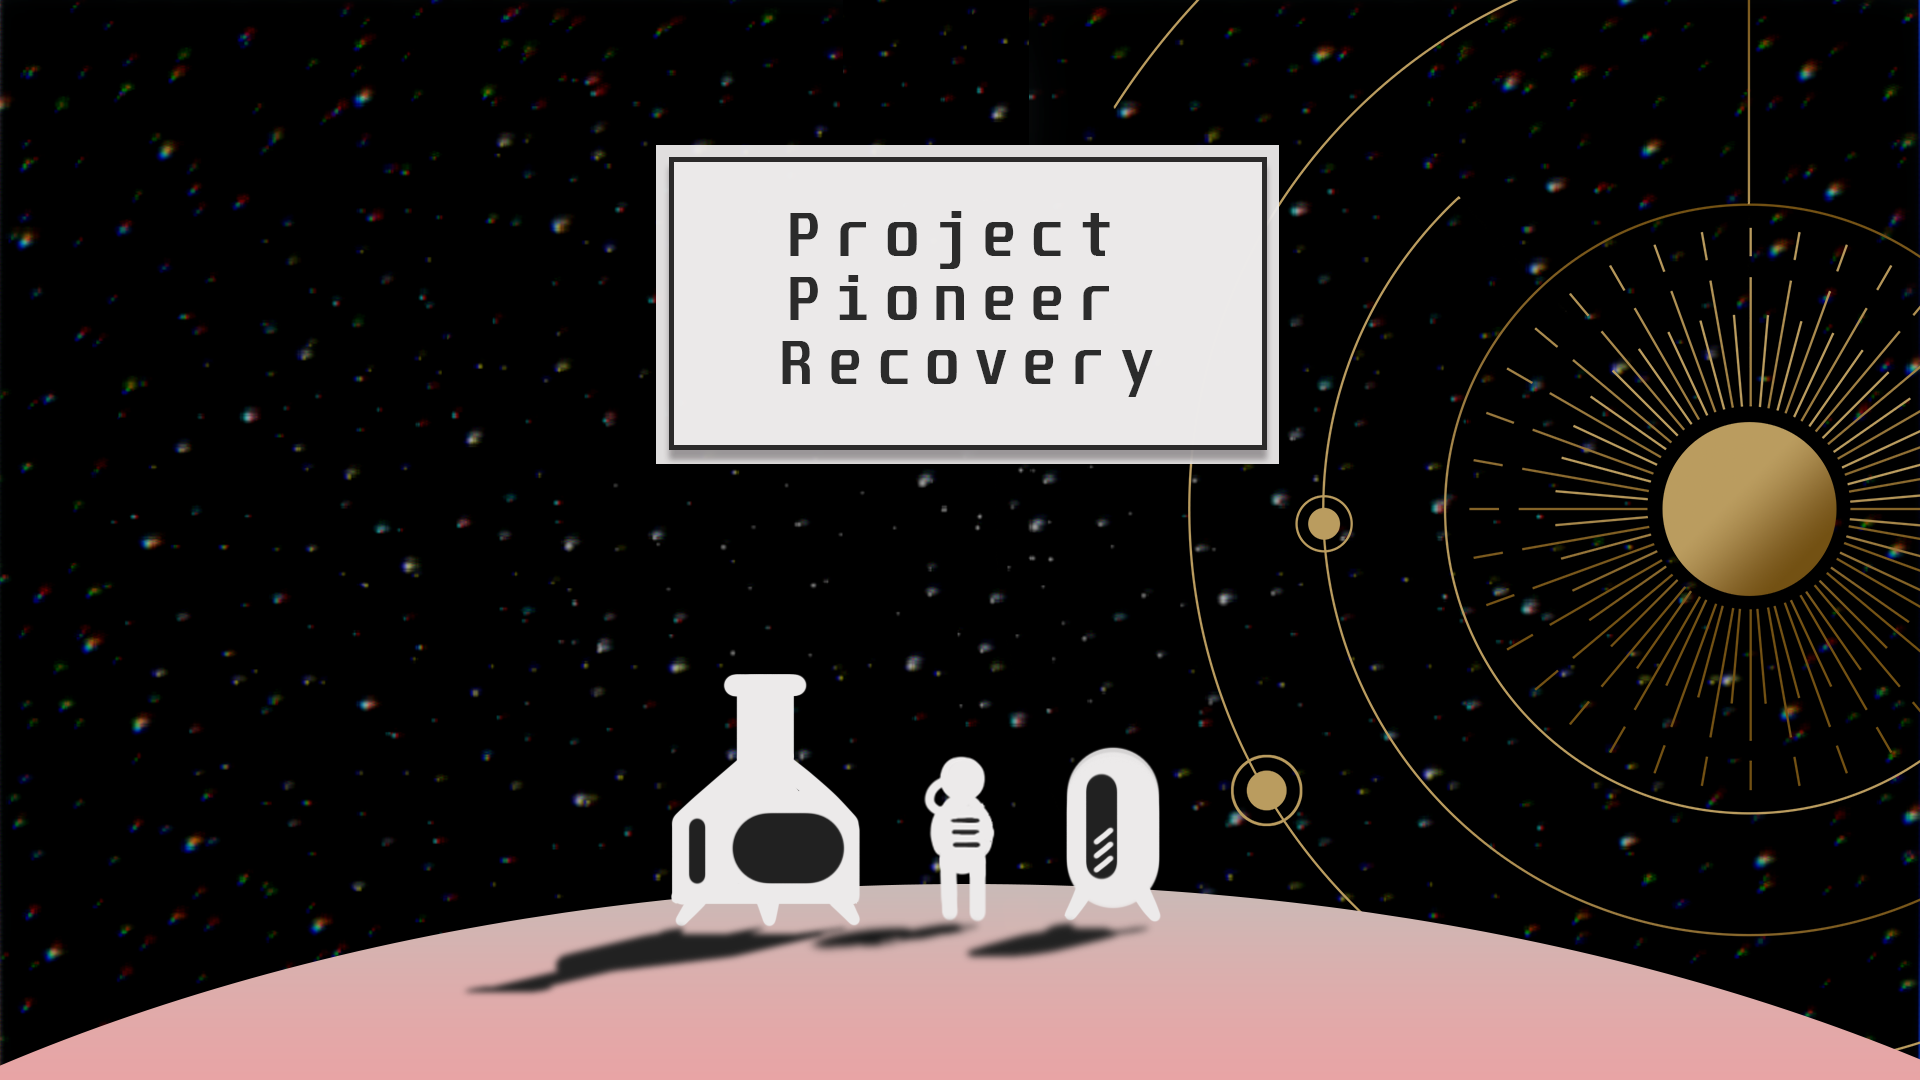 Project Pioneer Recovery